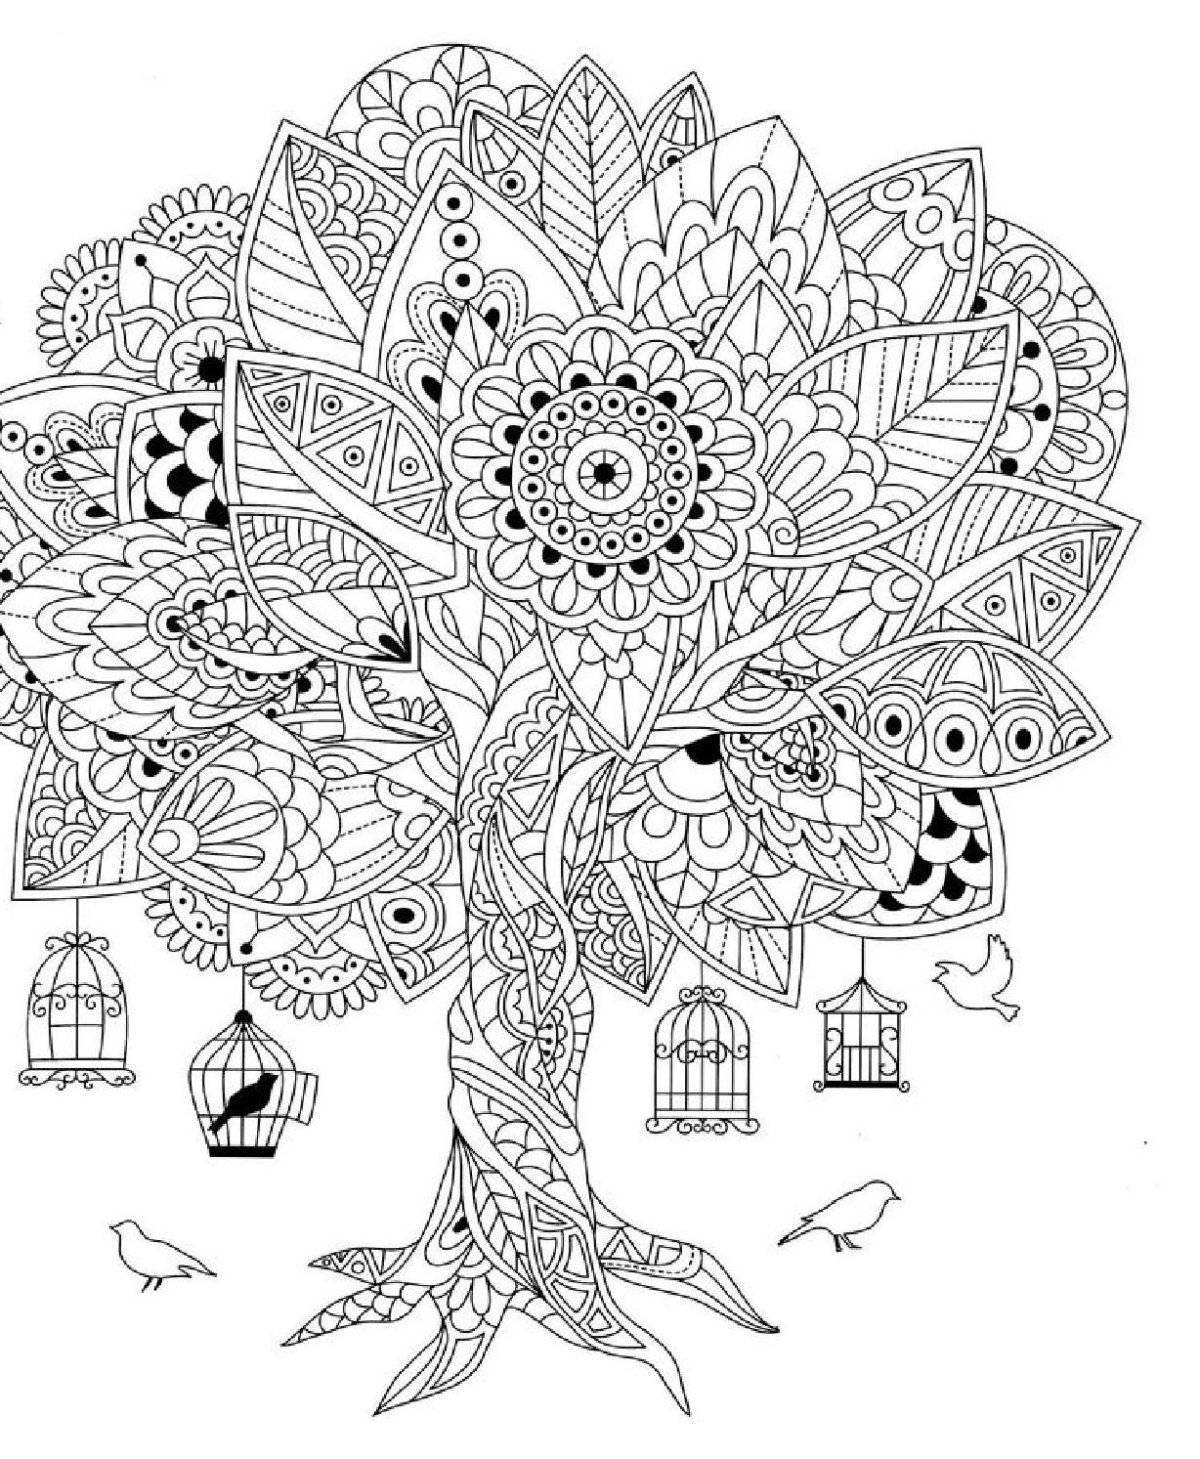 Rejuvenating coloring book to relax the nervous system